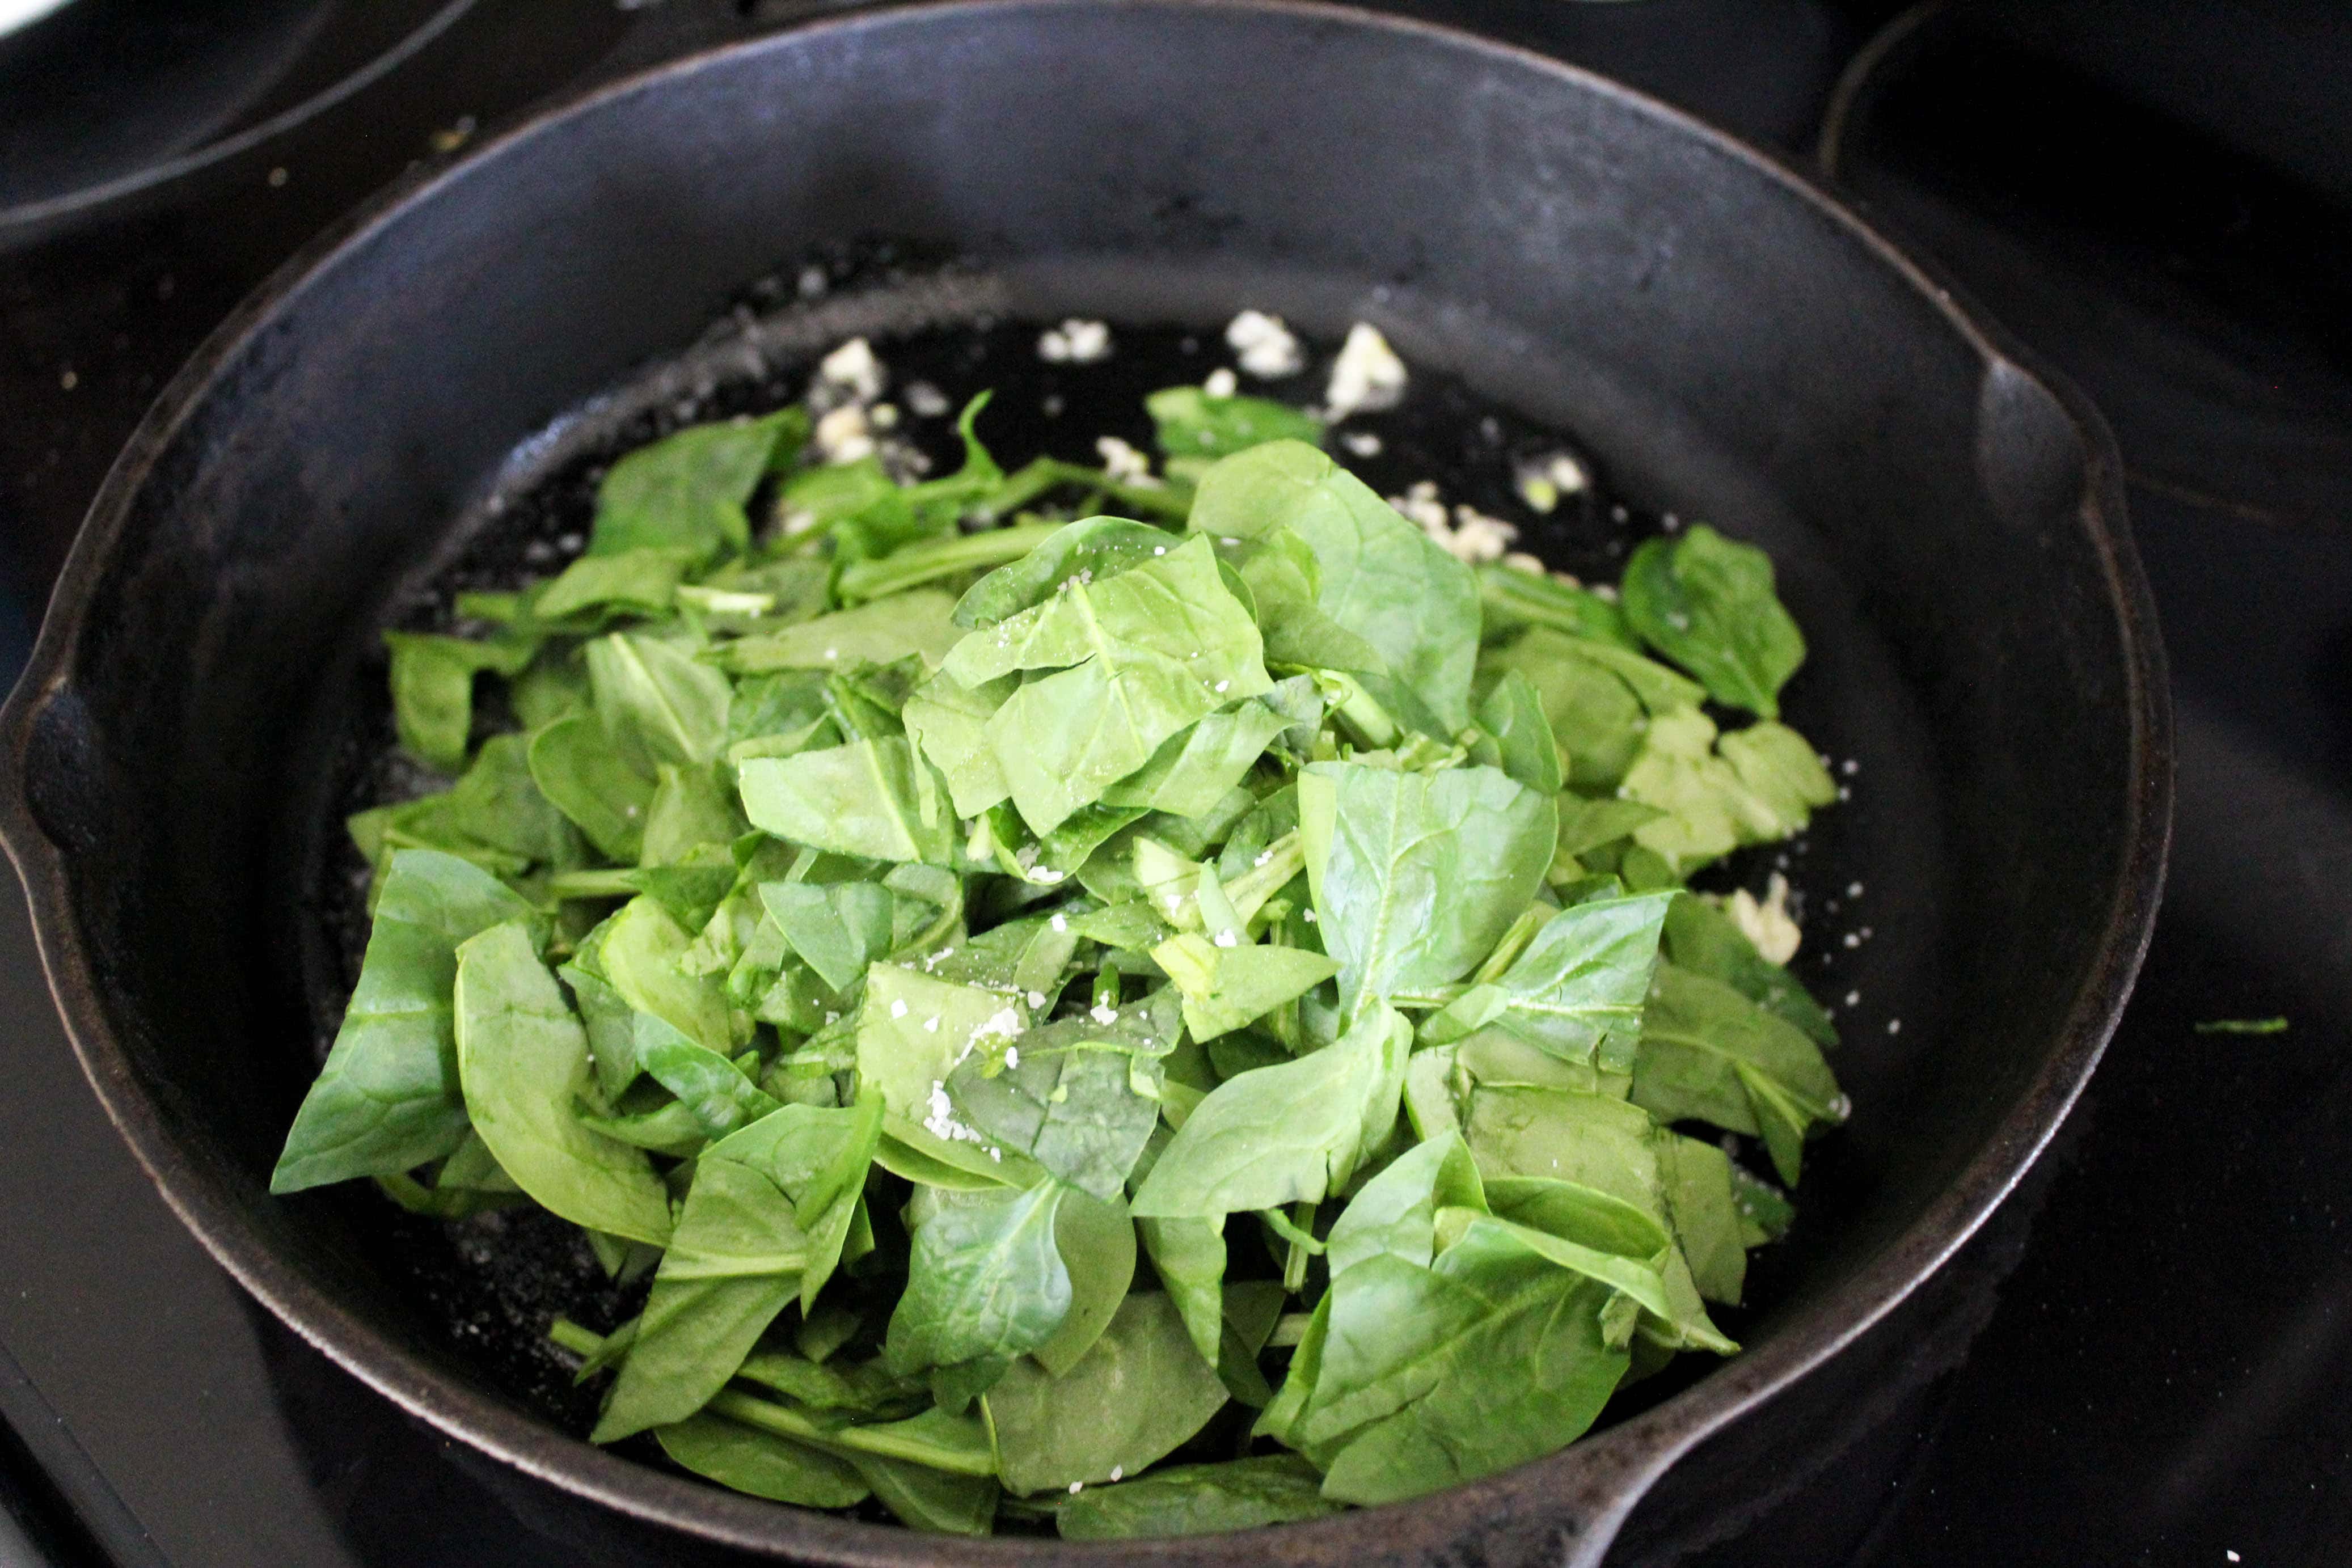 Chopped spinach being wilted in a black cast iron skillet.